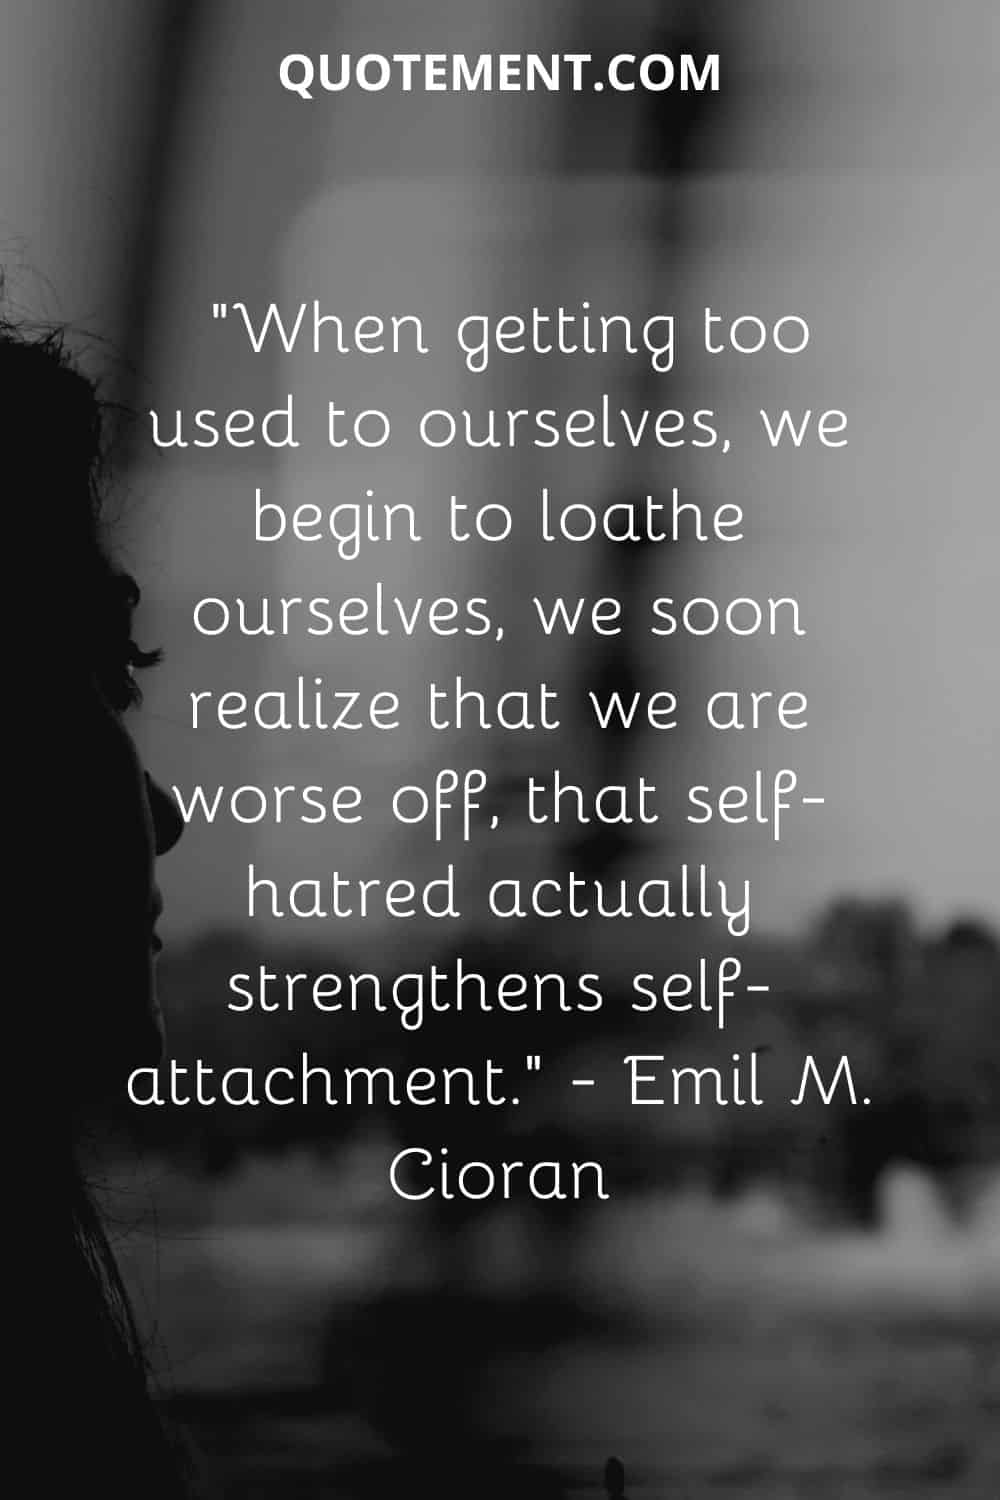 When getting too used to ourselves, we begin to loathe ourselves